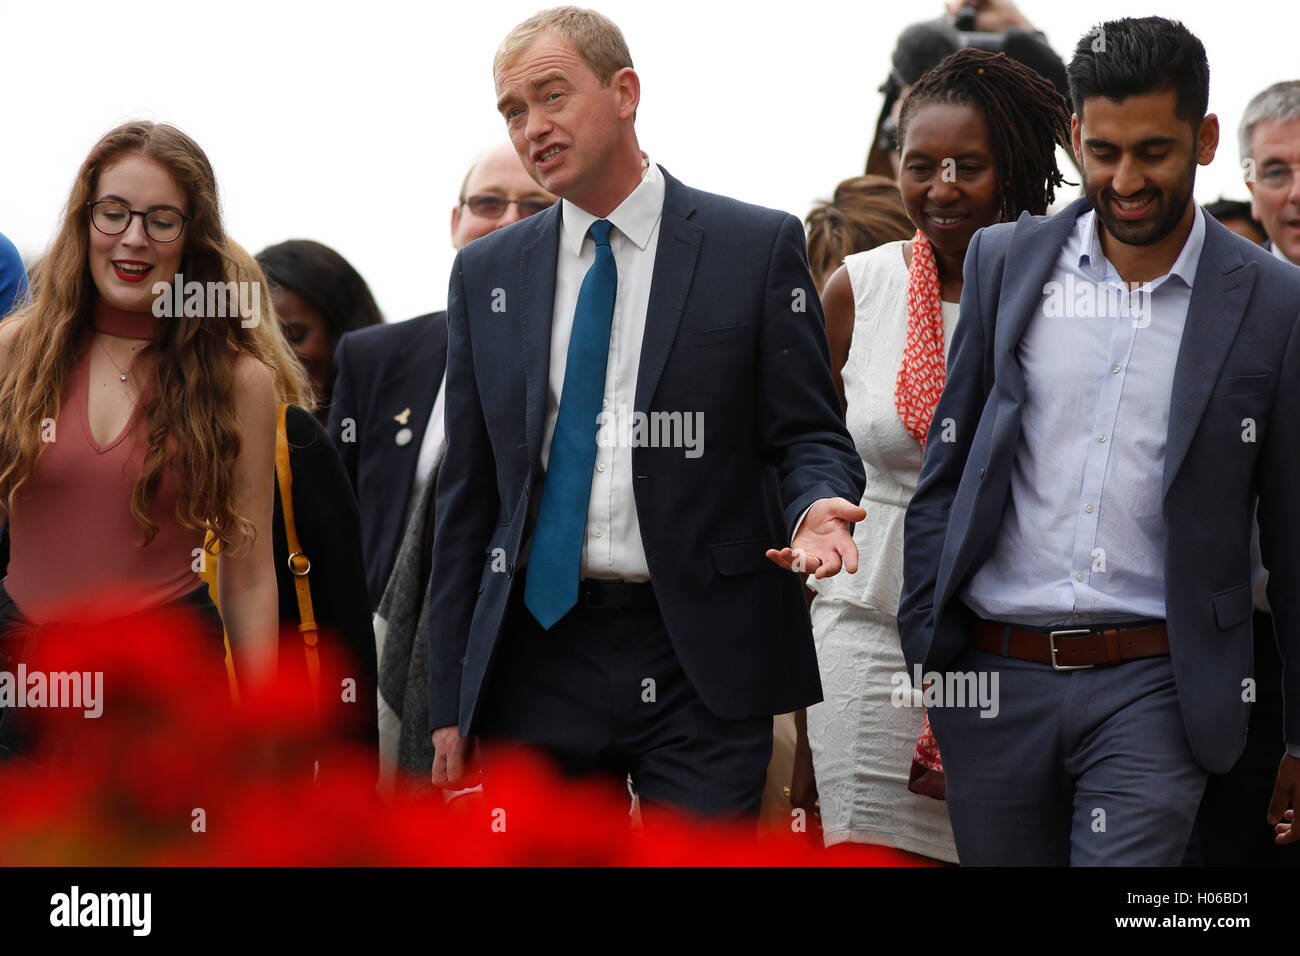 Brighton, UK. 20th Sep, 2016. Tim Farron, Party Leader arrives with party members to give his keynote speech during the Liberal Democrats Autumn Conference at Brighton, UK, Tuesday September 20, 2016.       Credit:  Luke MacGregor/Alamy Live News Stock Photo